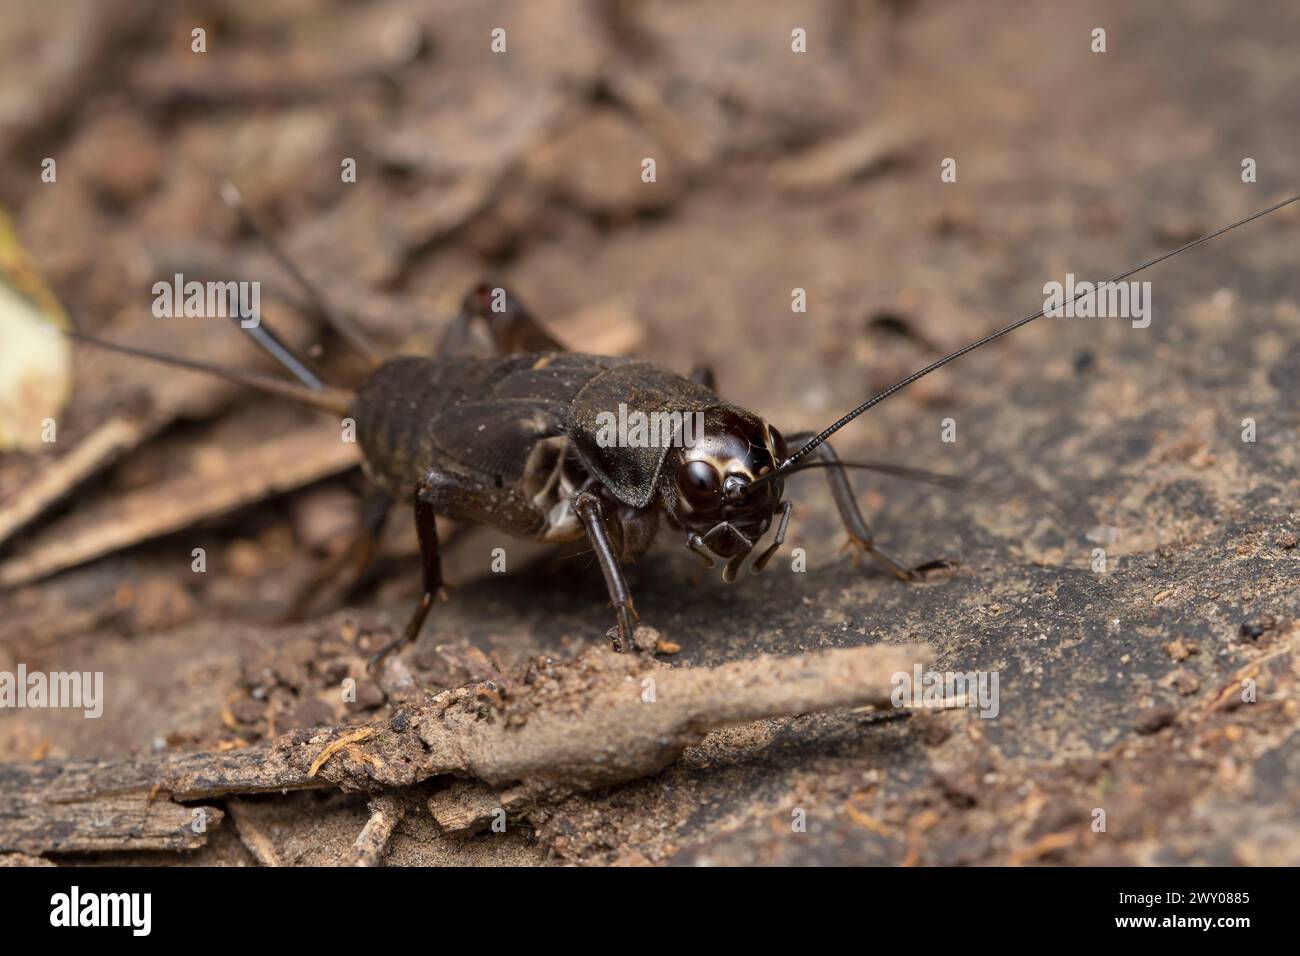 A wood cricket camouflaged among the leaf litter on the forest floor in Maharashtra, India. Stock Photo